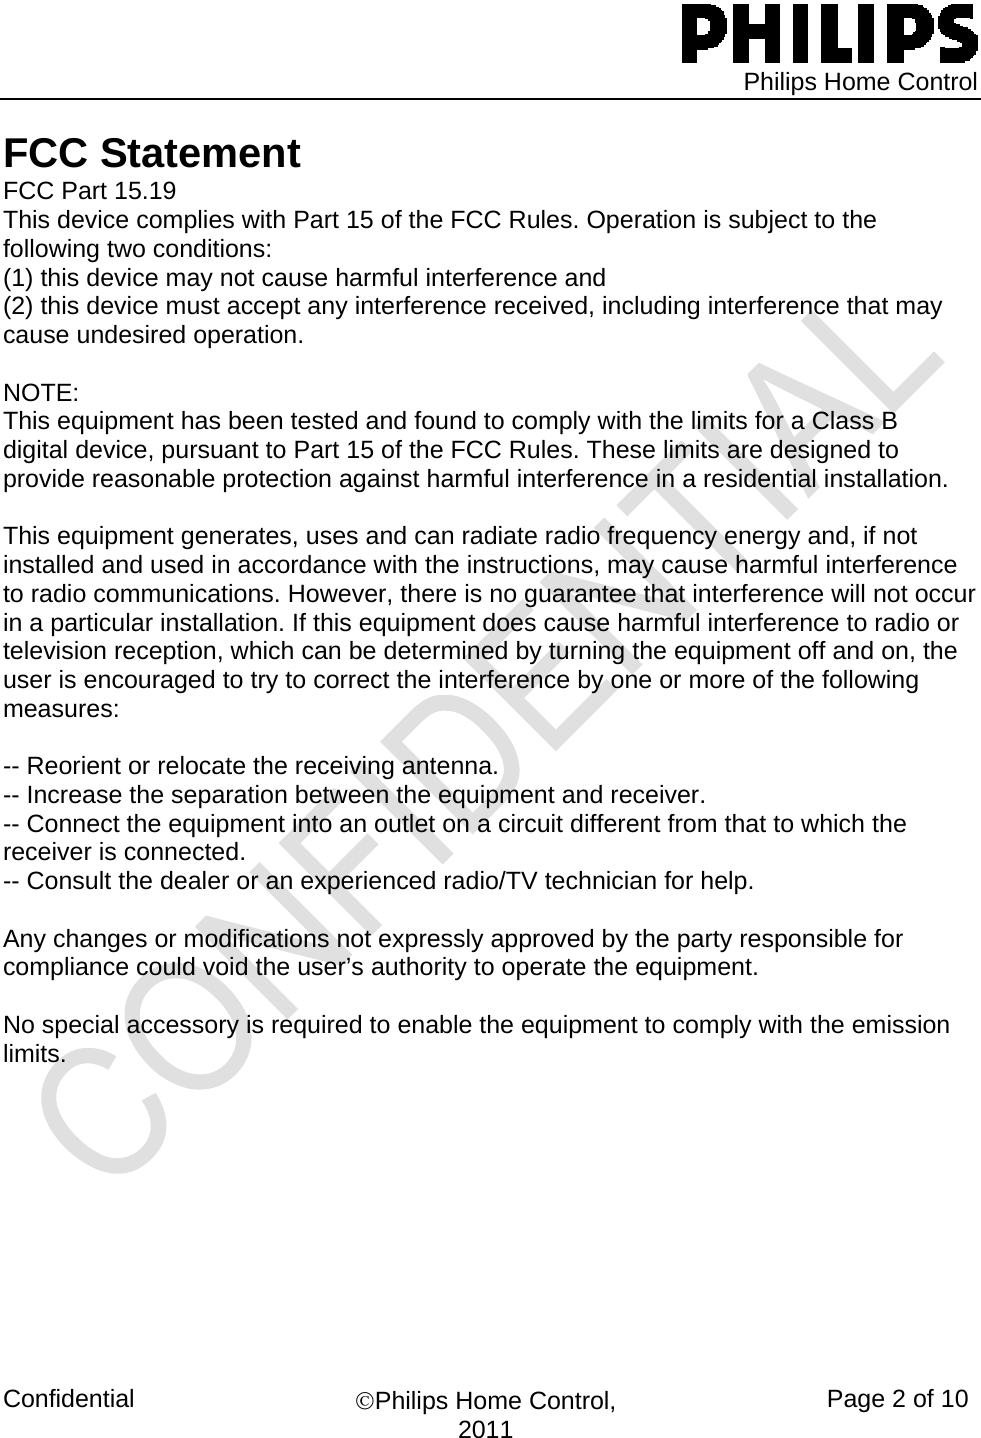   Philips Home Control Confidential  ©Philips Home Control, 2011  Page 2 of 10 FCC Statement FCC Part 15.19 This device complies with Part 15 of the FCC Rules. Operation is subject to the following two conditions:  (1) this device may not cause harmful interference and  (2) this device must accept any interference received, including interference that may cause undesired operation.  NOTE:  This equipment has been tested and found to comply with the limits for a Class B digital device, pursuant to Part 15 of the FCC Rules. These limits are designed to provide reasonable protection against harmful interference in a residential installation.   This equipment generates, uses and can radiate radio frequency energy and, if not installed and used in accordance with the instructions, may cause harmful interference to radio communications. However, there is no guarantee that interference will not occur in a particular installation. If this equipment does cause harmful interference to radio or television reception, which can be determined by turning the equipment off and on, the user is encouraged to try to correct the interference by one or more of the following measures:  -- Reorient or relocate the receiving antenna. -- Increase the separation between the equipment and receiver. -- Connect the equipment into an outlet on a circuit different from that to which the receiver is connected. -- Consult the dealer or an experienced radio/TV technician for help.  Any changes or modifications not expressly approved by the party responsible for compliance could void the user’s authority to operate the equipment.  No special accessory is required to enable the equipment to comply with the emission limits.                                  